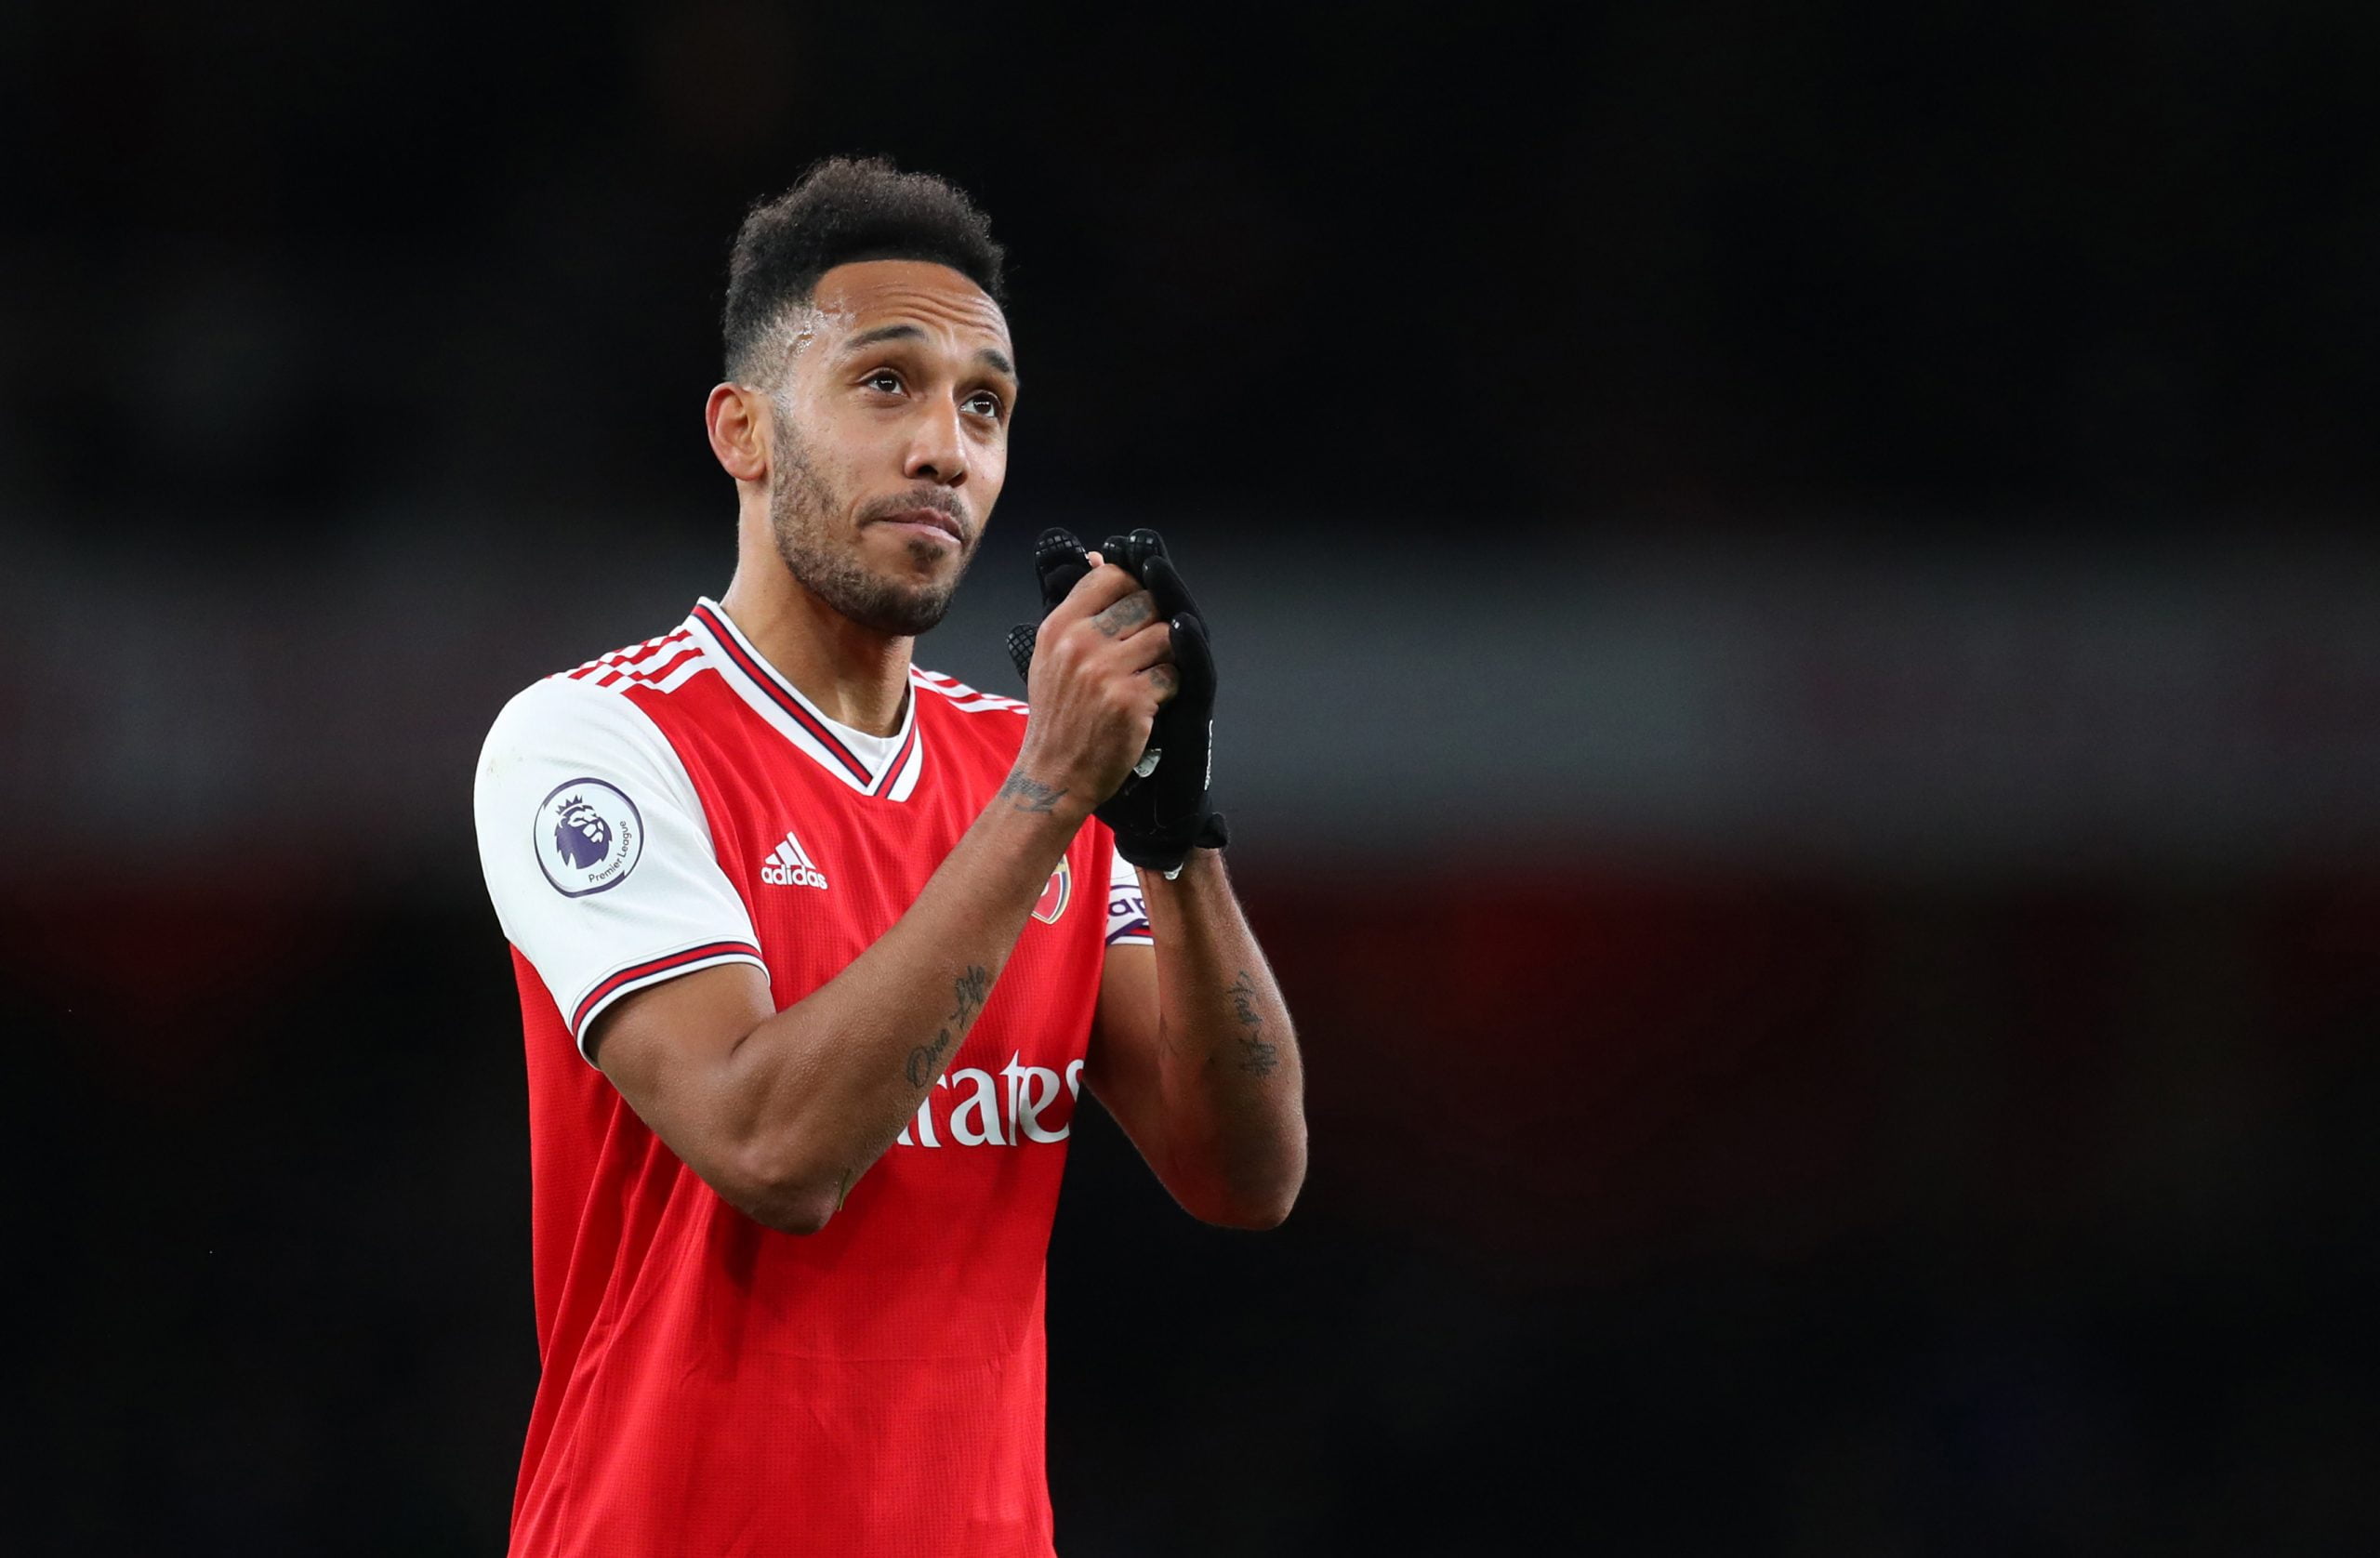 Three Arsenal players who need to step up this season - Aubameyang is one of the them.